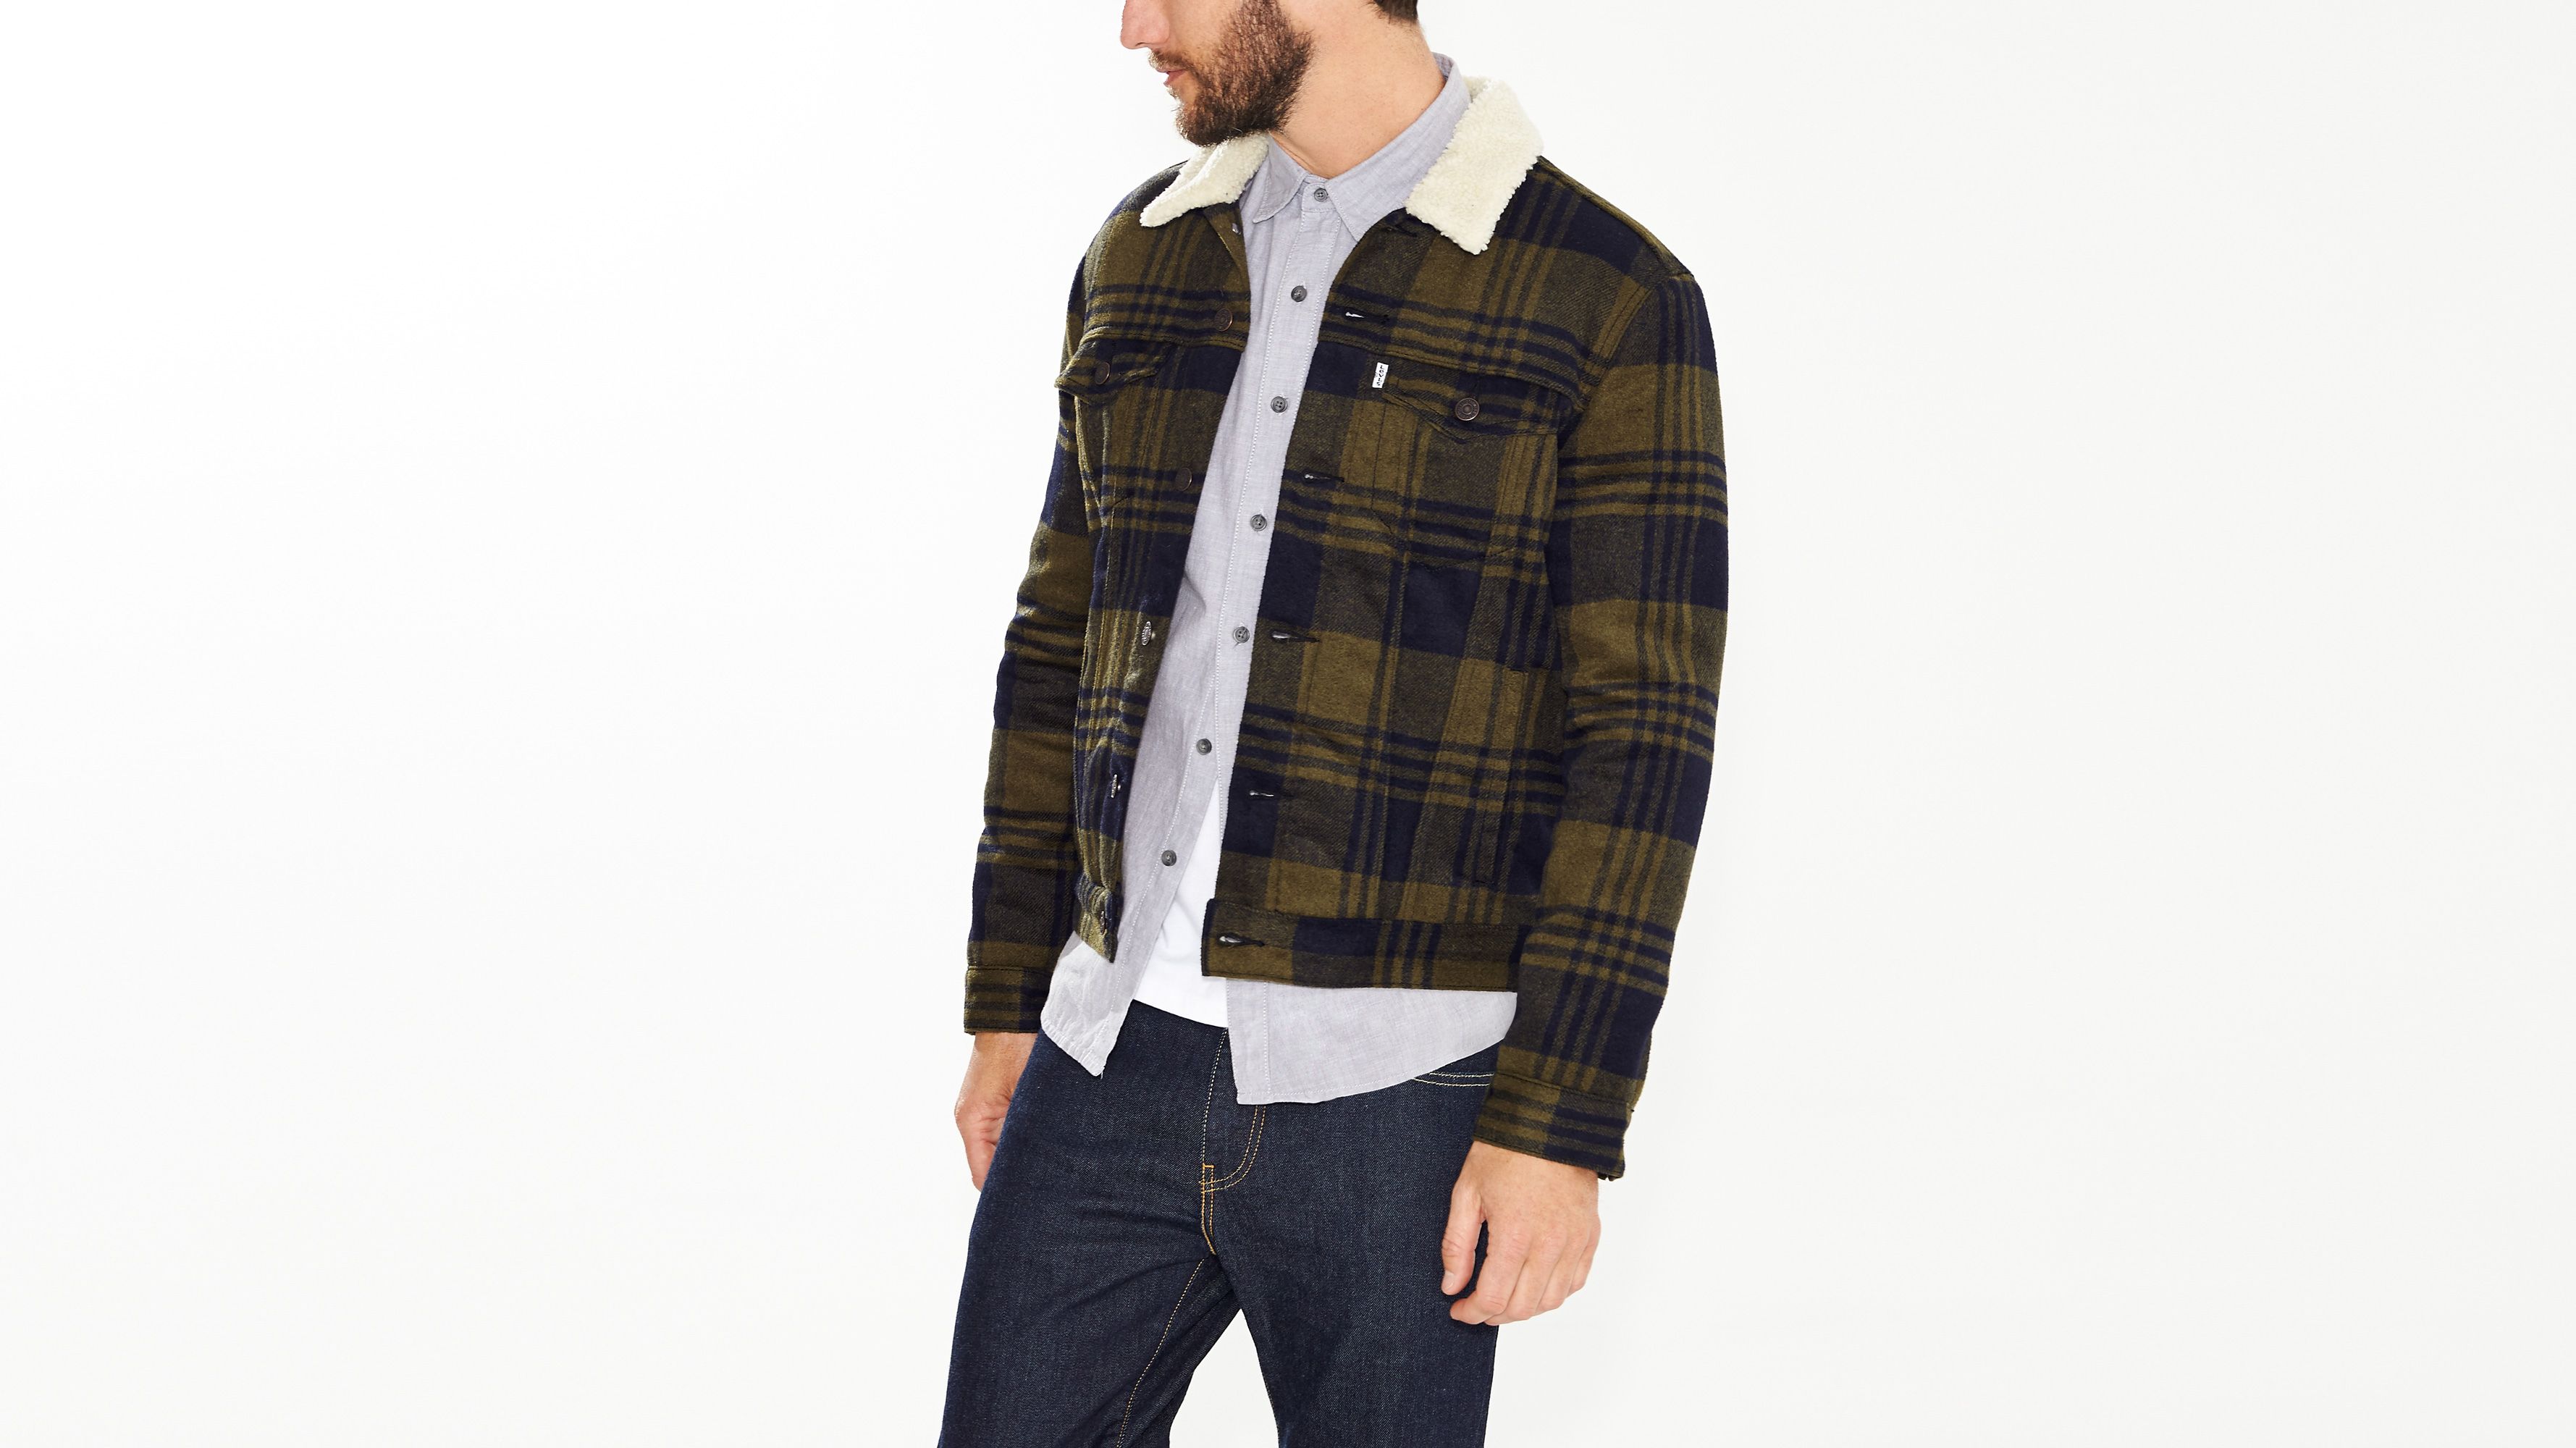 levi's red plaid sherpa jacket